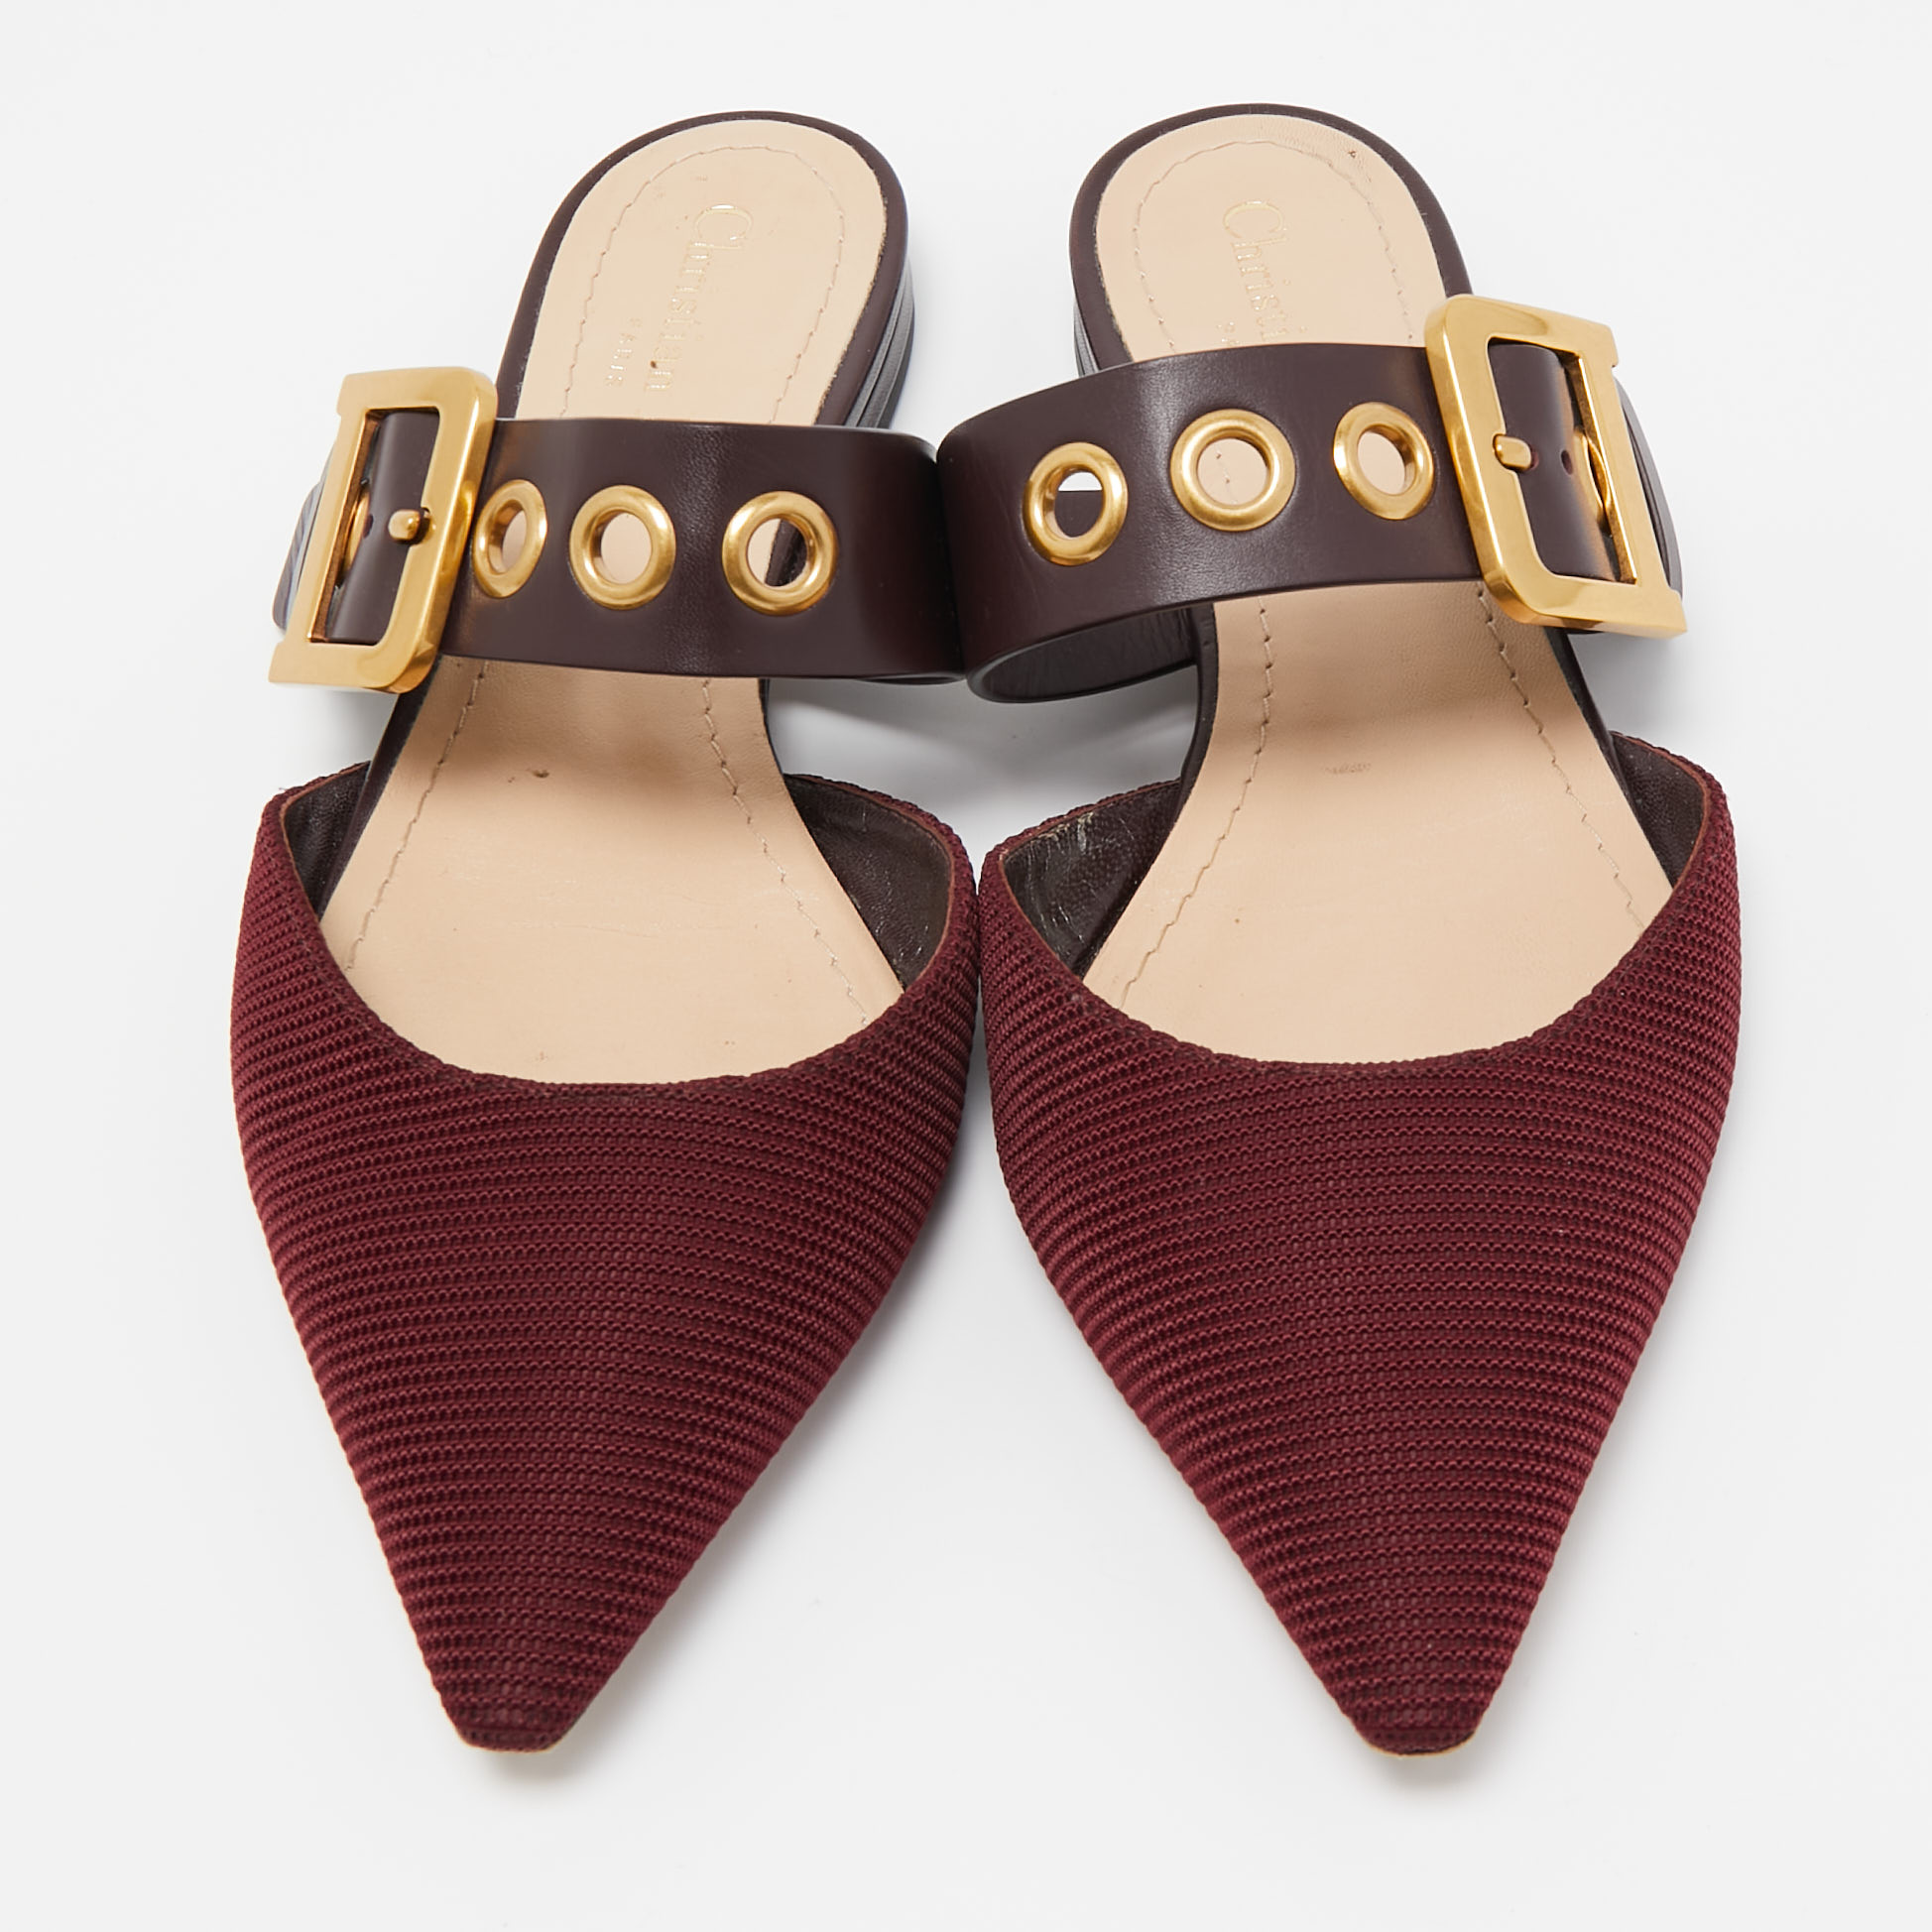 Dior Burgundy Canvas And Leather D-Dior Slide Mules Size 38